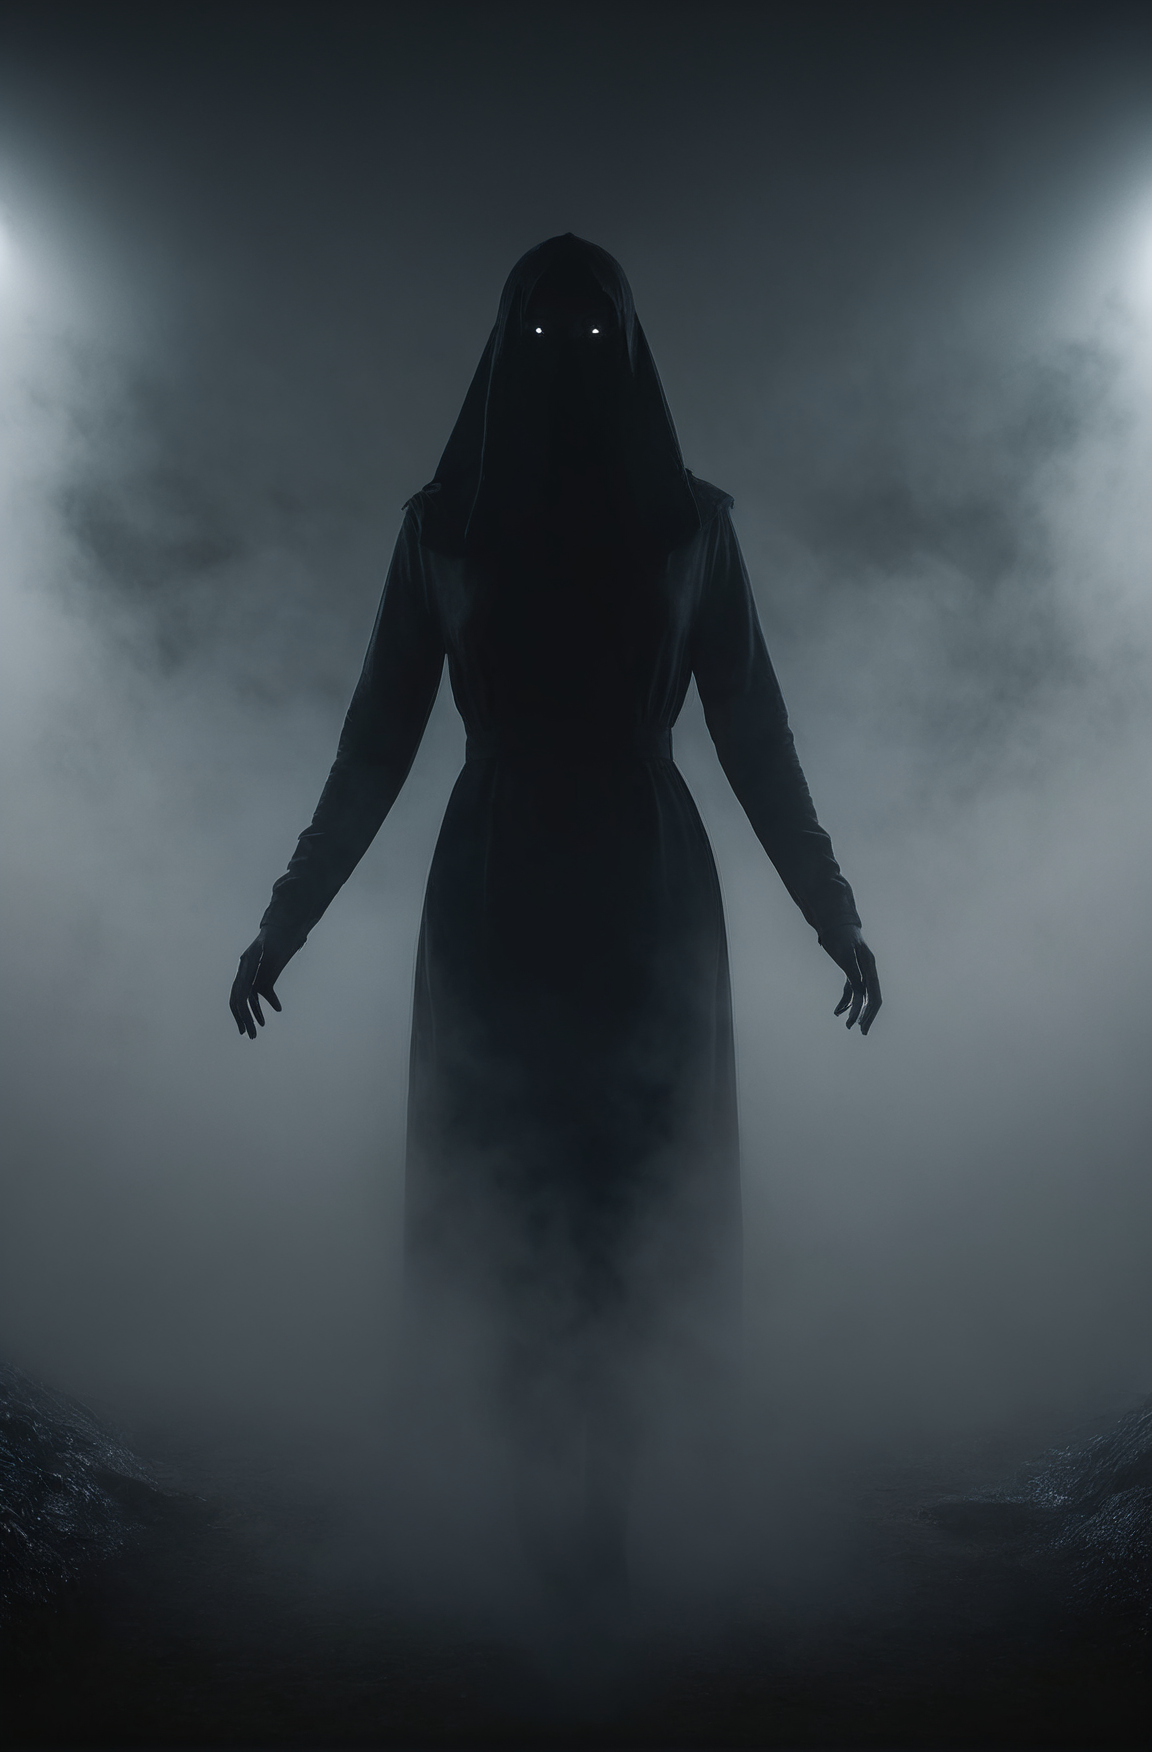 demonic, spooky, scary shadow figure woman emerging from the darkness, black and grey gradient, foggy, realistic, 8k, unre...